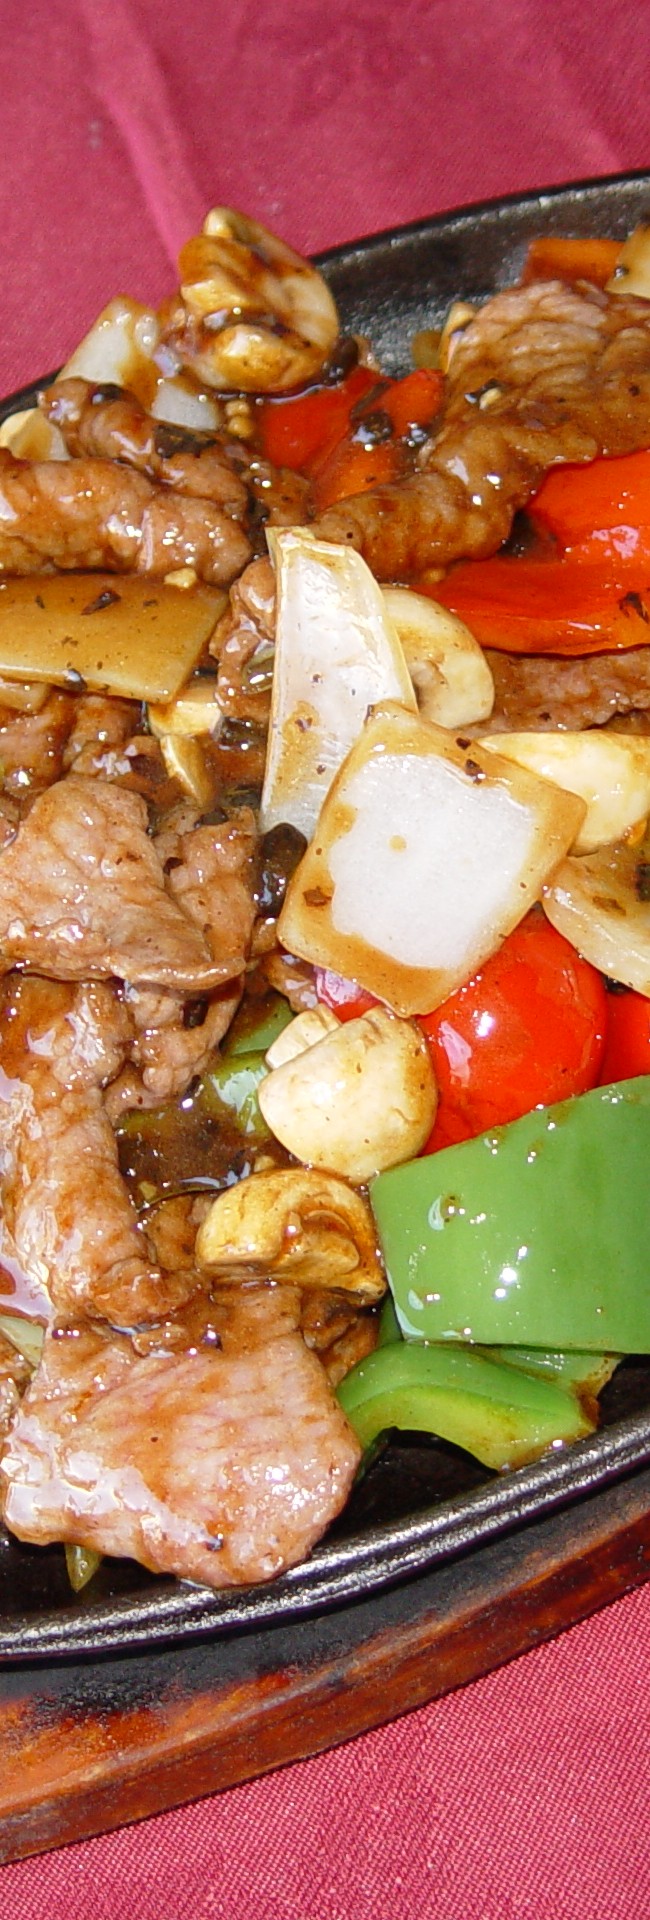 Beef and Black Bean Sauce